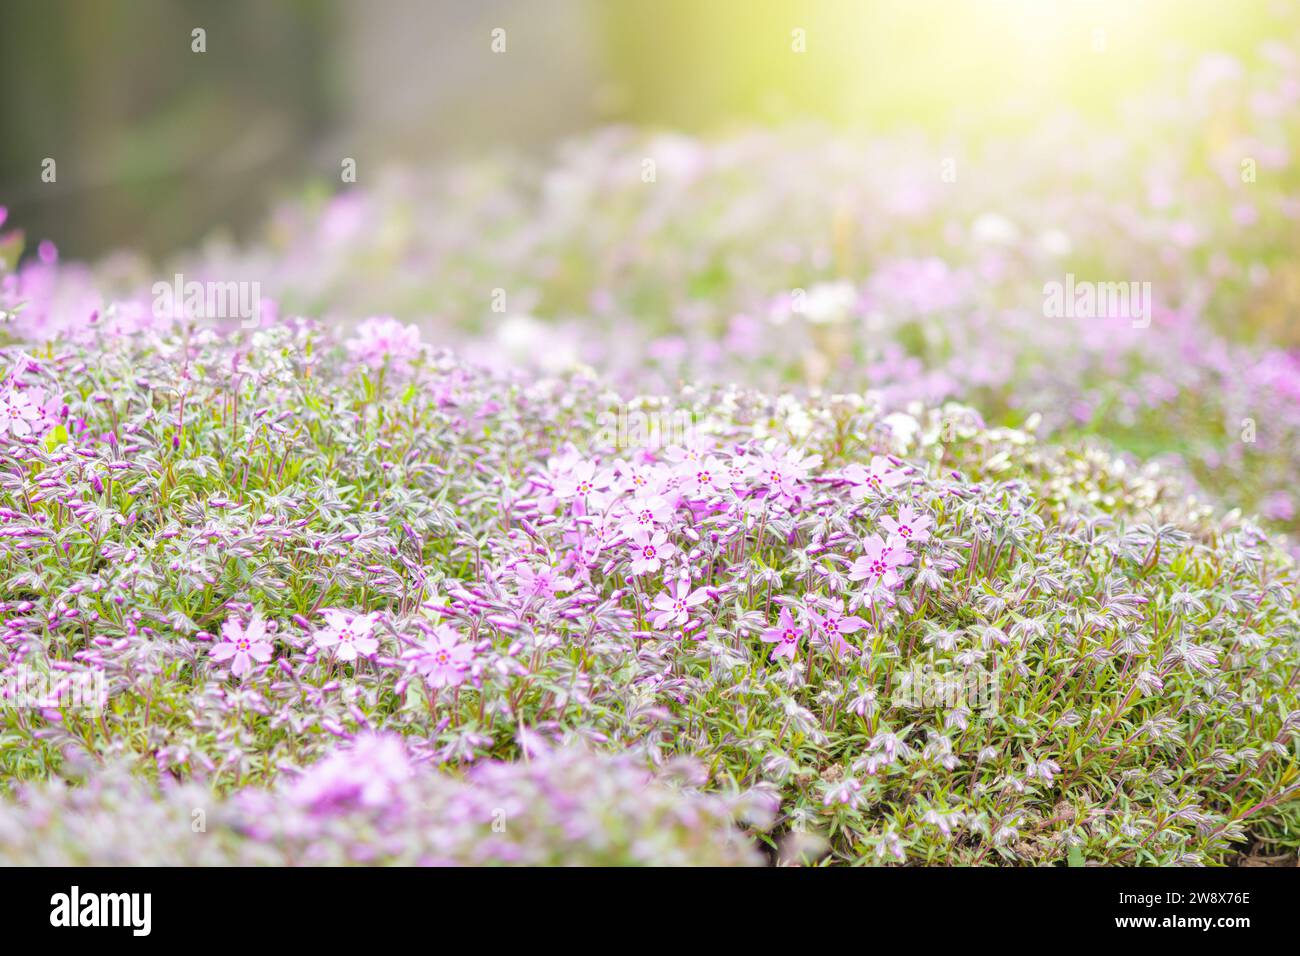 Close-up of pink Moss phlox flowers pink verbena on a blurred background. Stock Photo